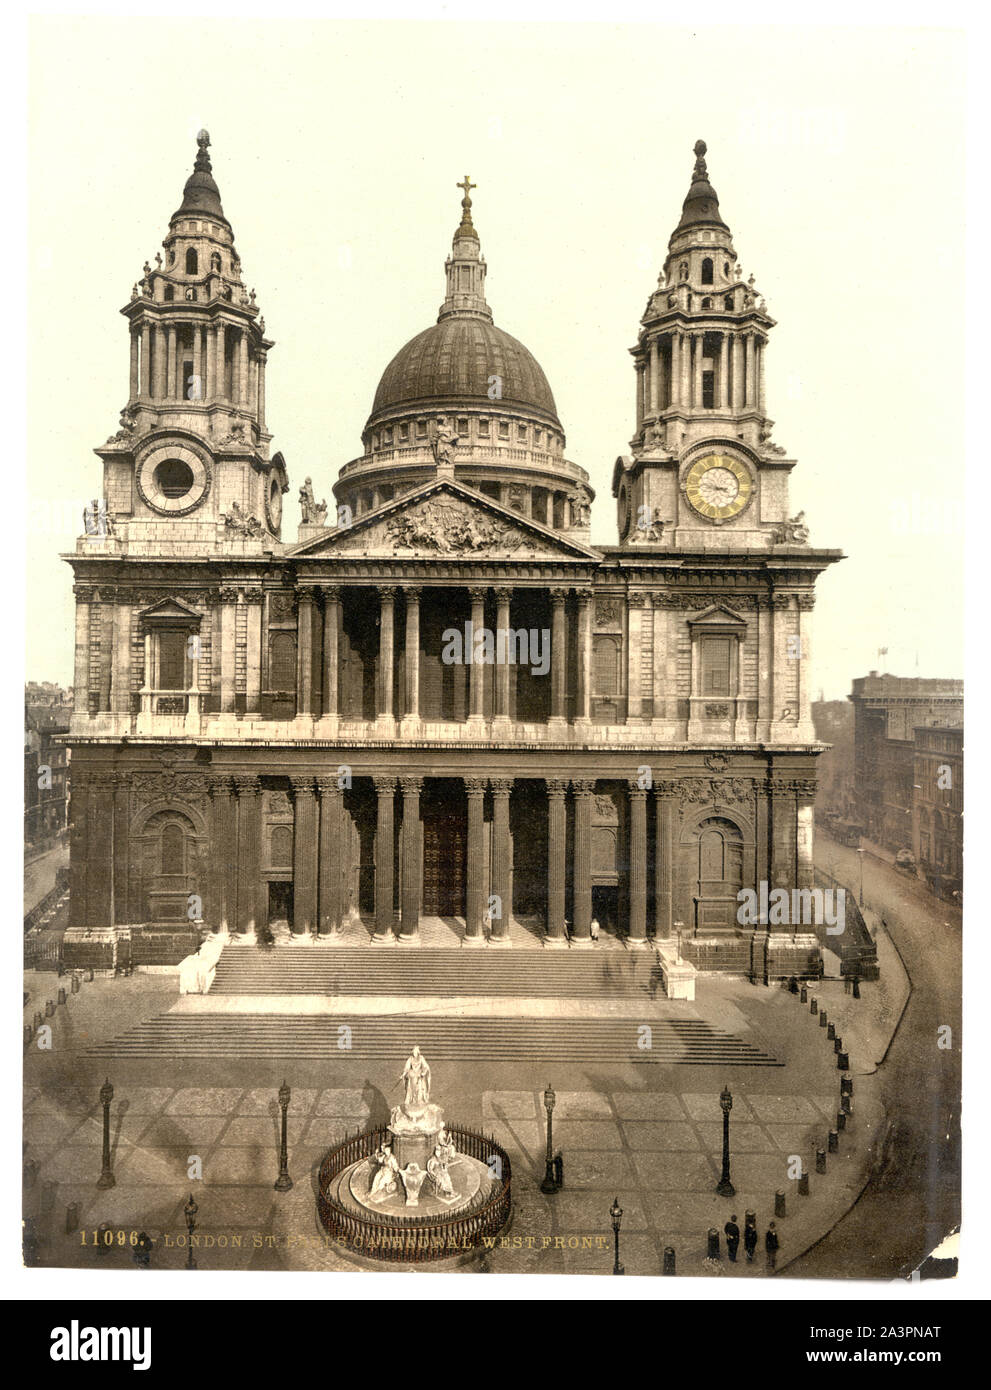 St. Paul's Cathedral, West Front, London, England Forms part of: Views of the British Isles, in the Photochrom print collection. Stock Photo